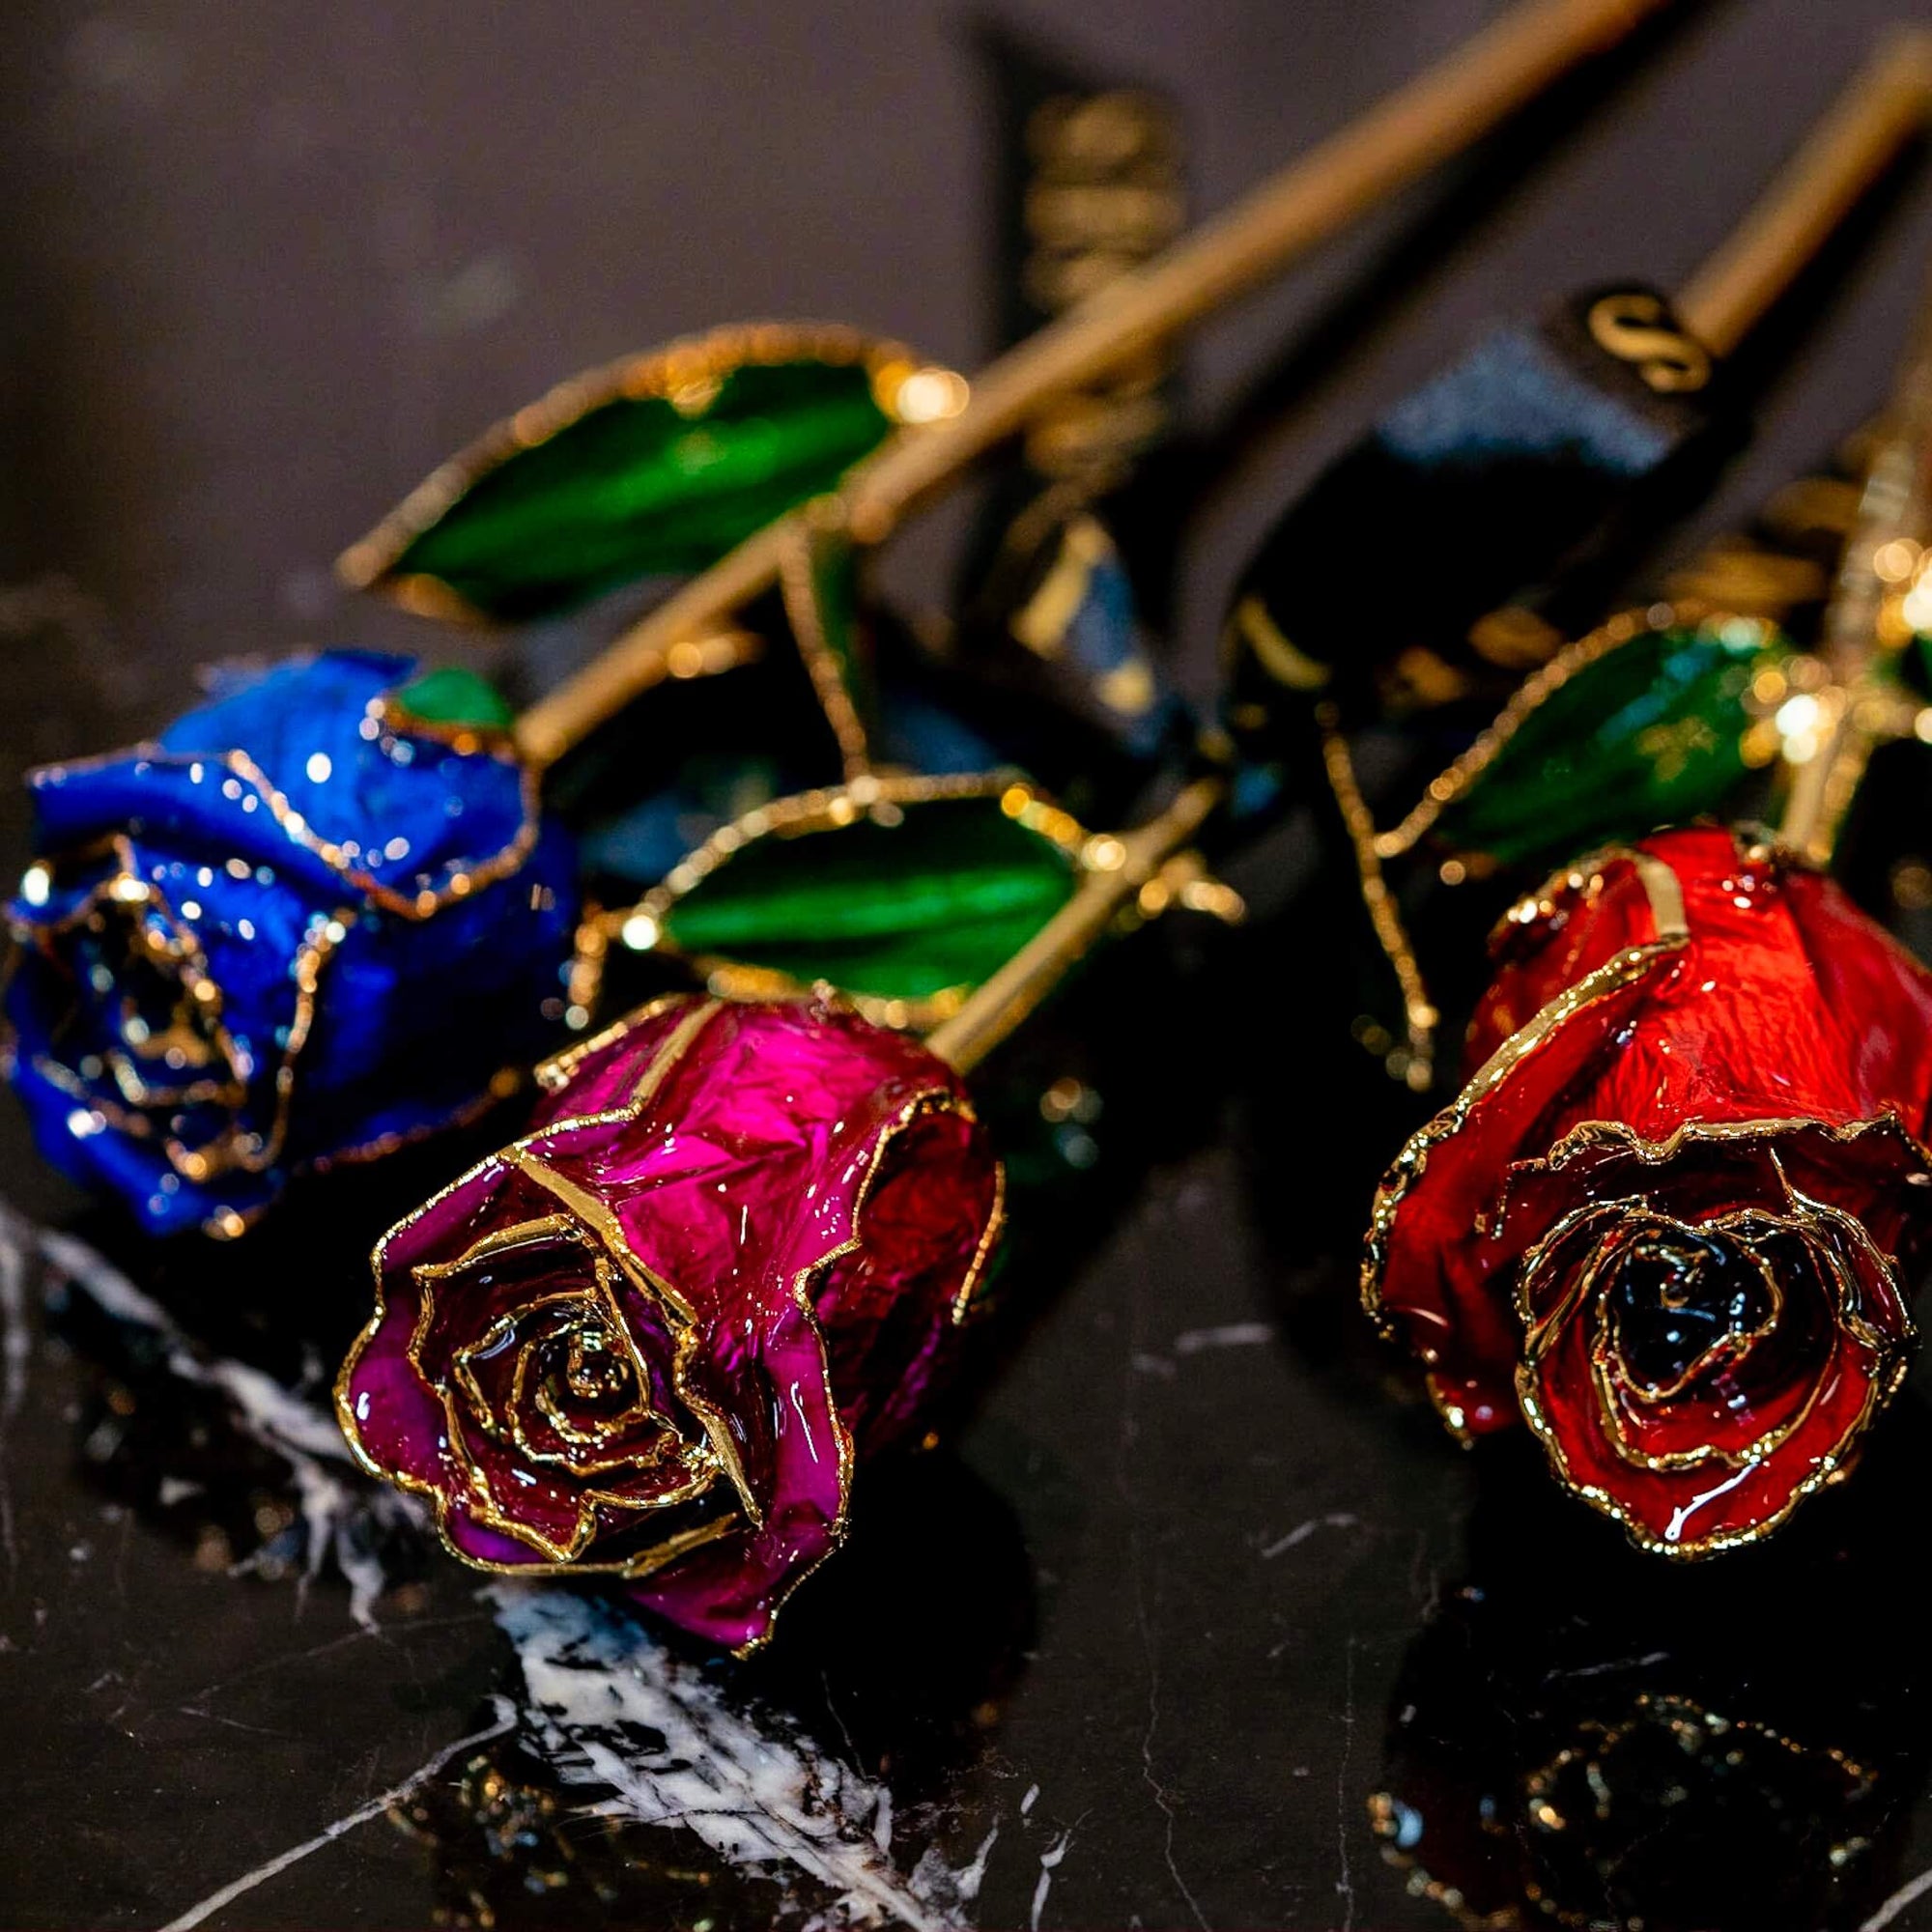 lumiere roses